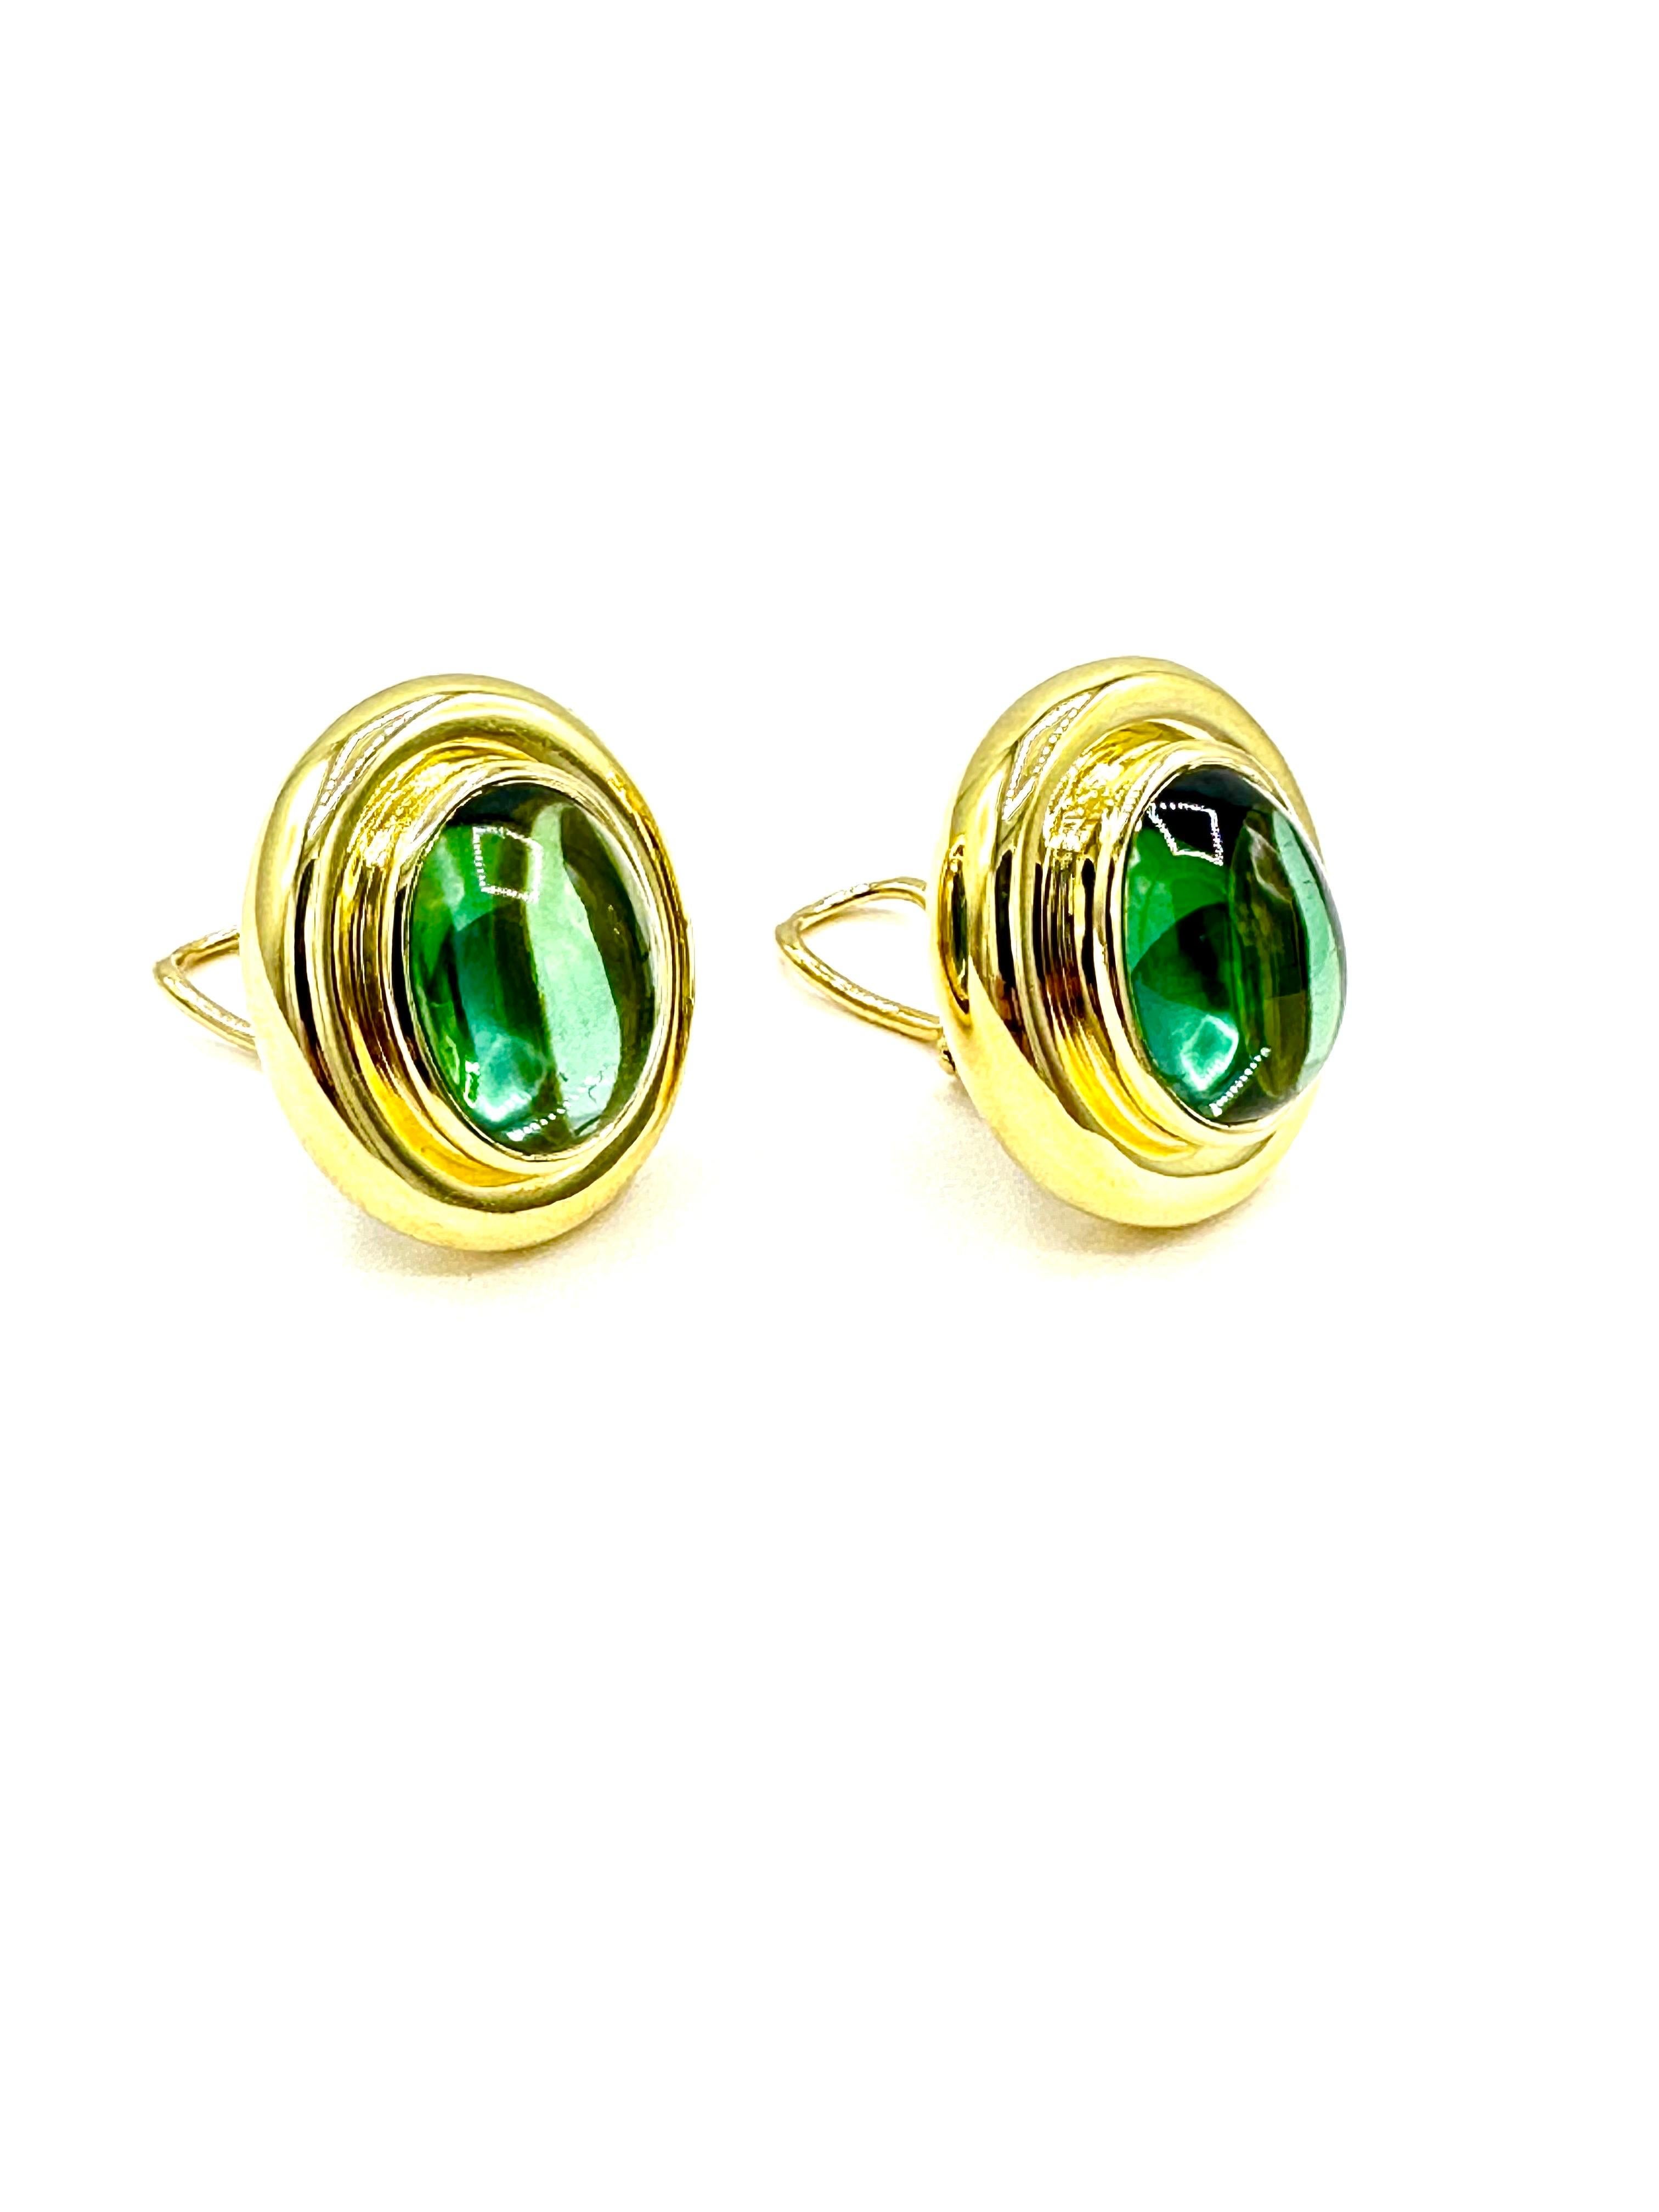 Paloma Picasso Cabochon Green Tourmaline 18K Yellow Gold Earrings  1